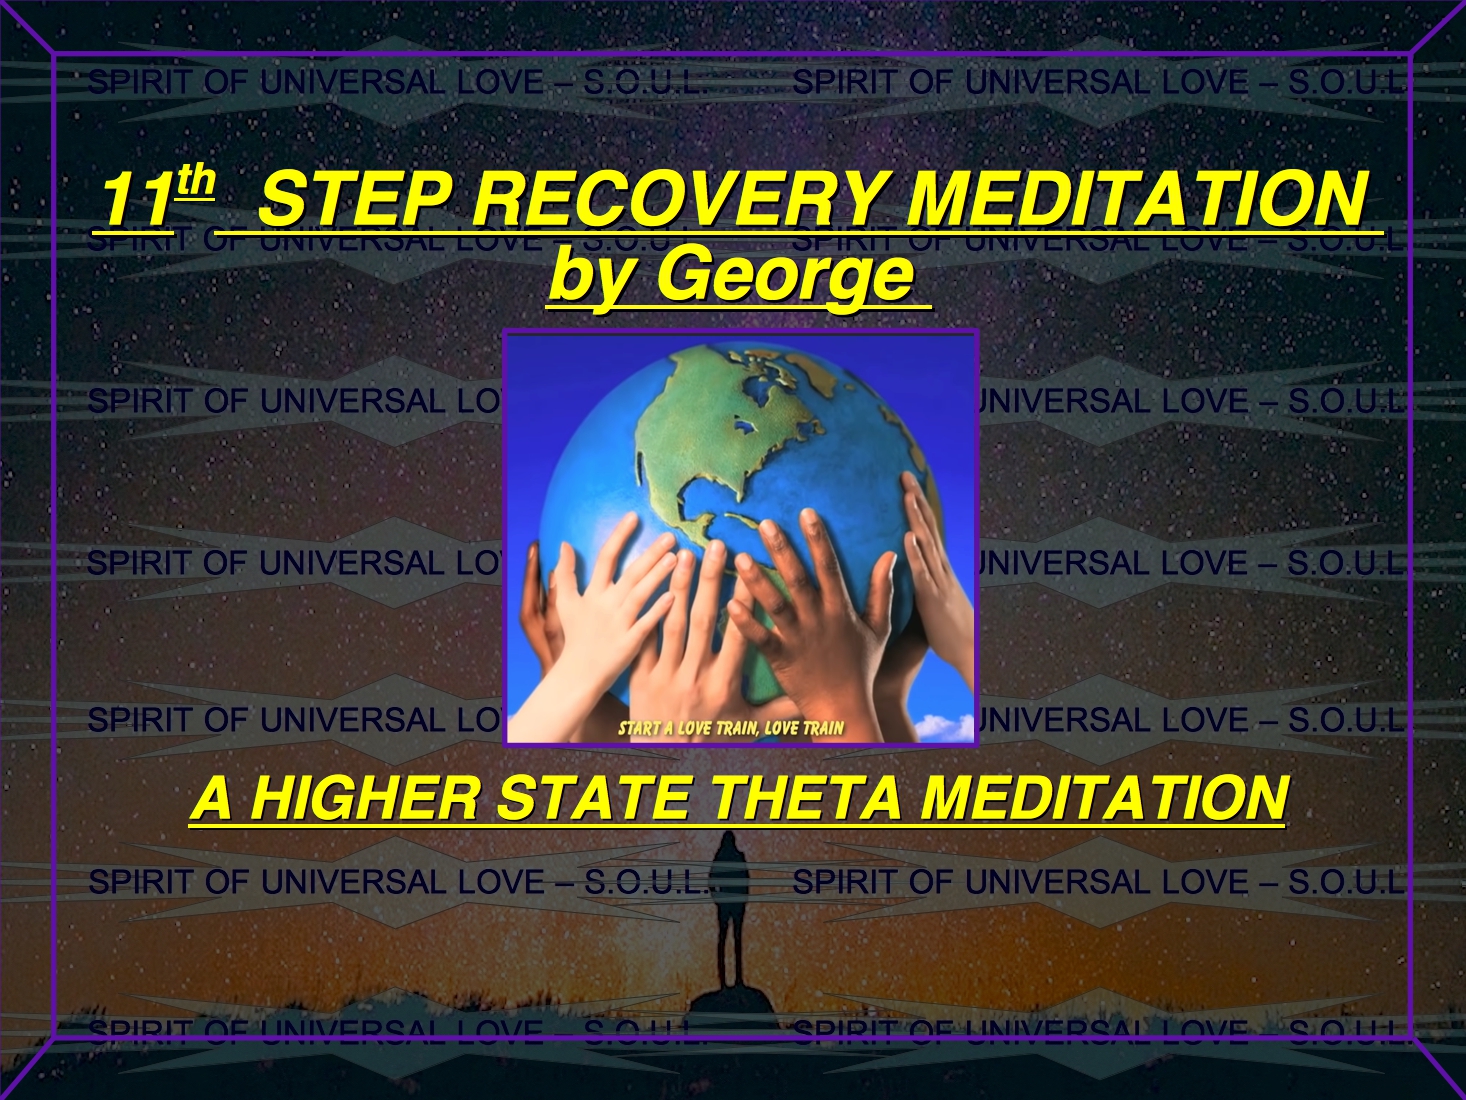 ===================================================IPANEL
YOUTUBE OVERLAY -11TH-STEP-MEDITATION-by-George
=============================================================================PANEL

YOUTUBE OVERLAY -11TH-STEP-MEDITATION-by-George-